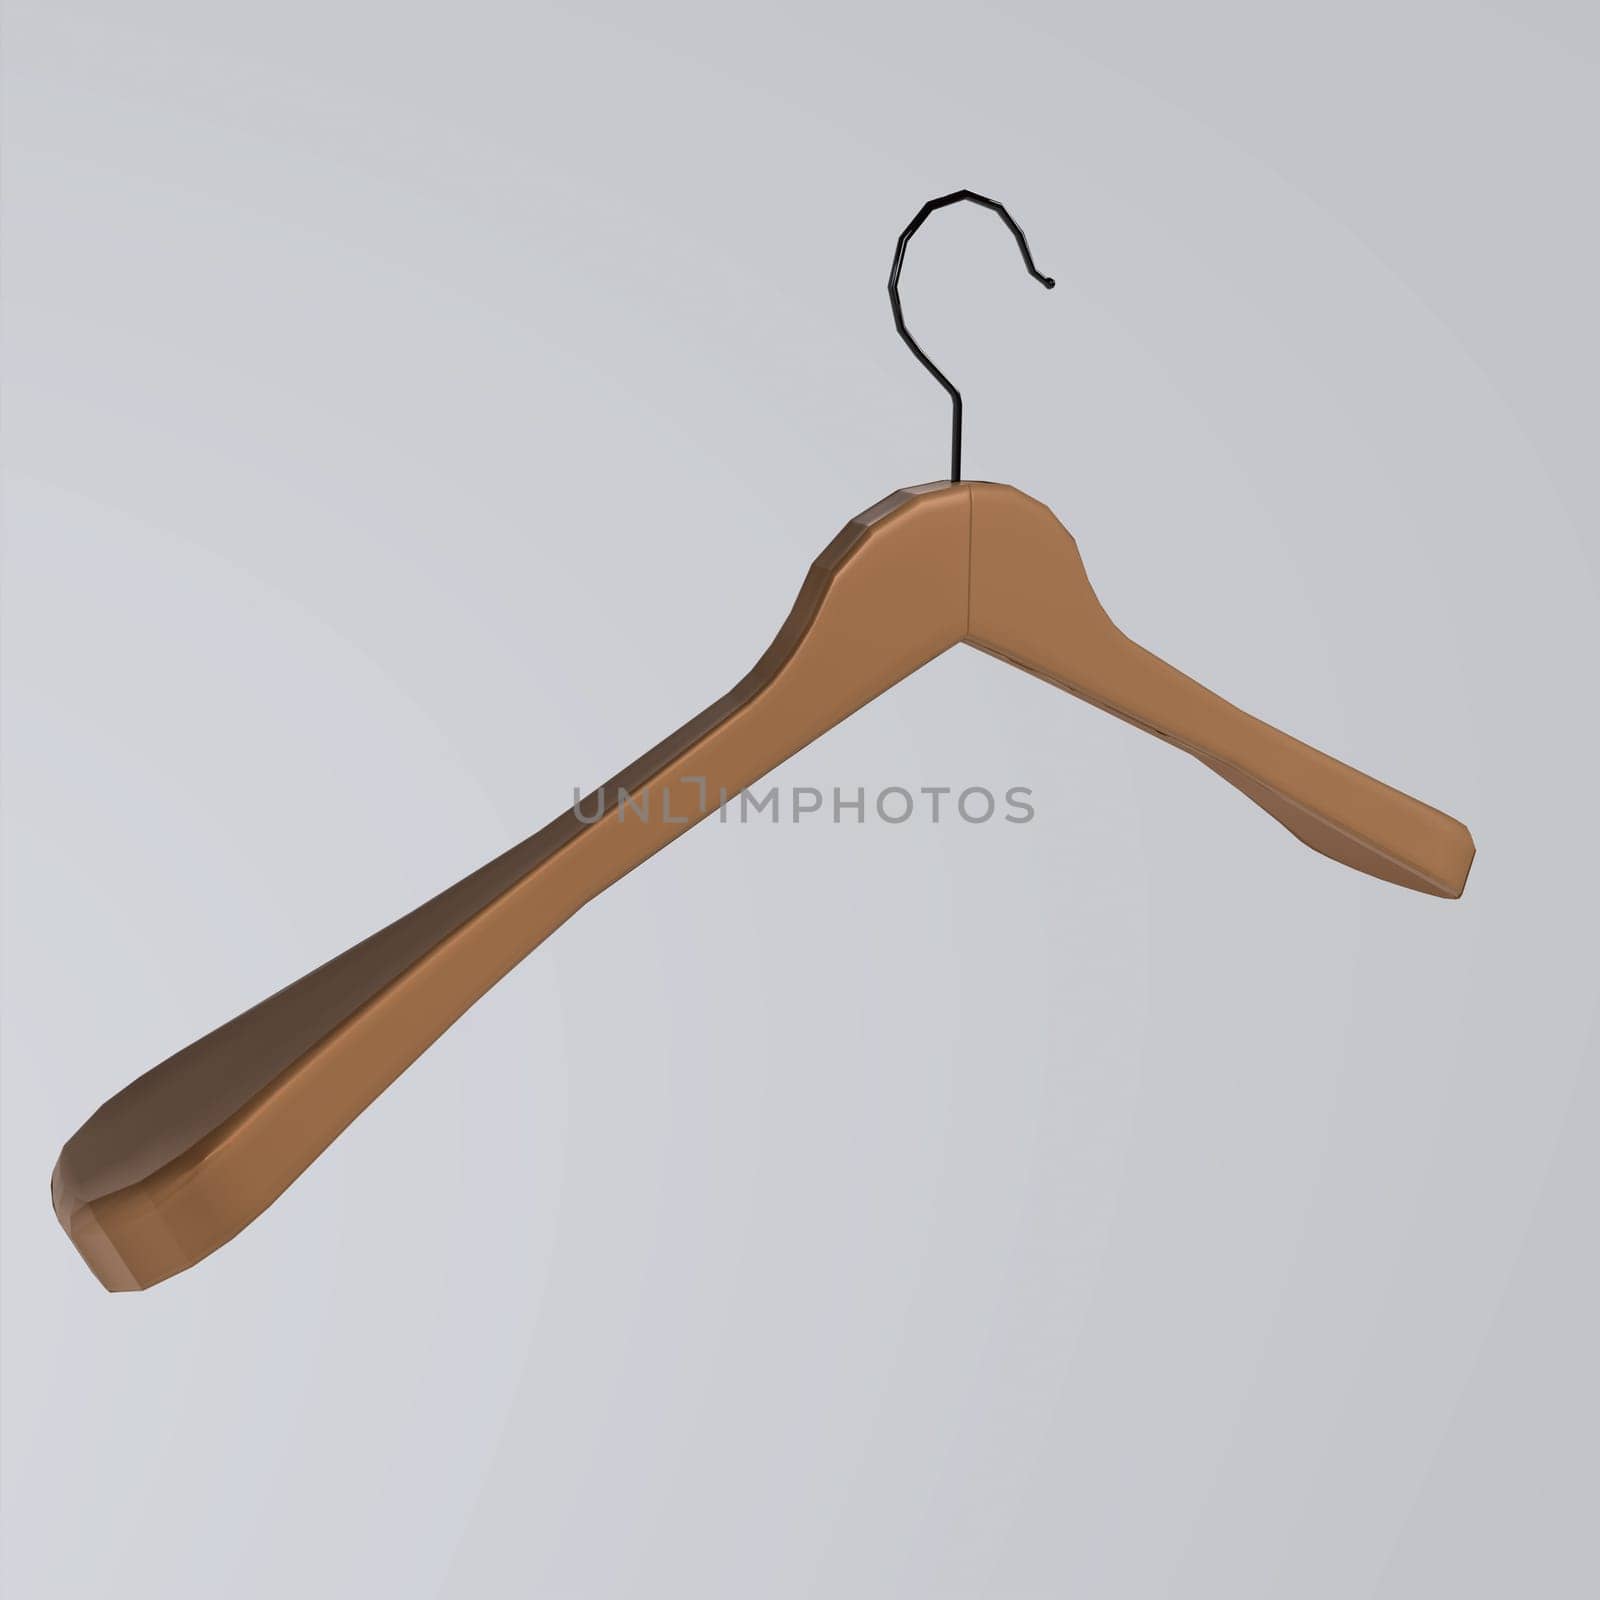 Hanger isolated on white background by gadreel